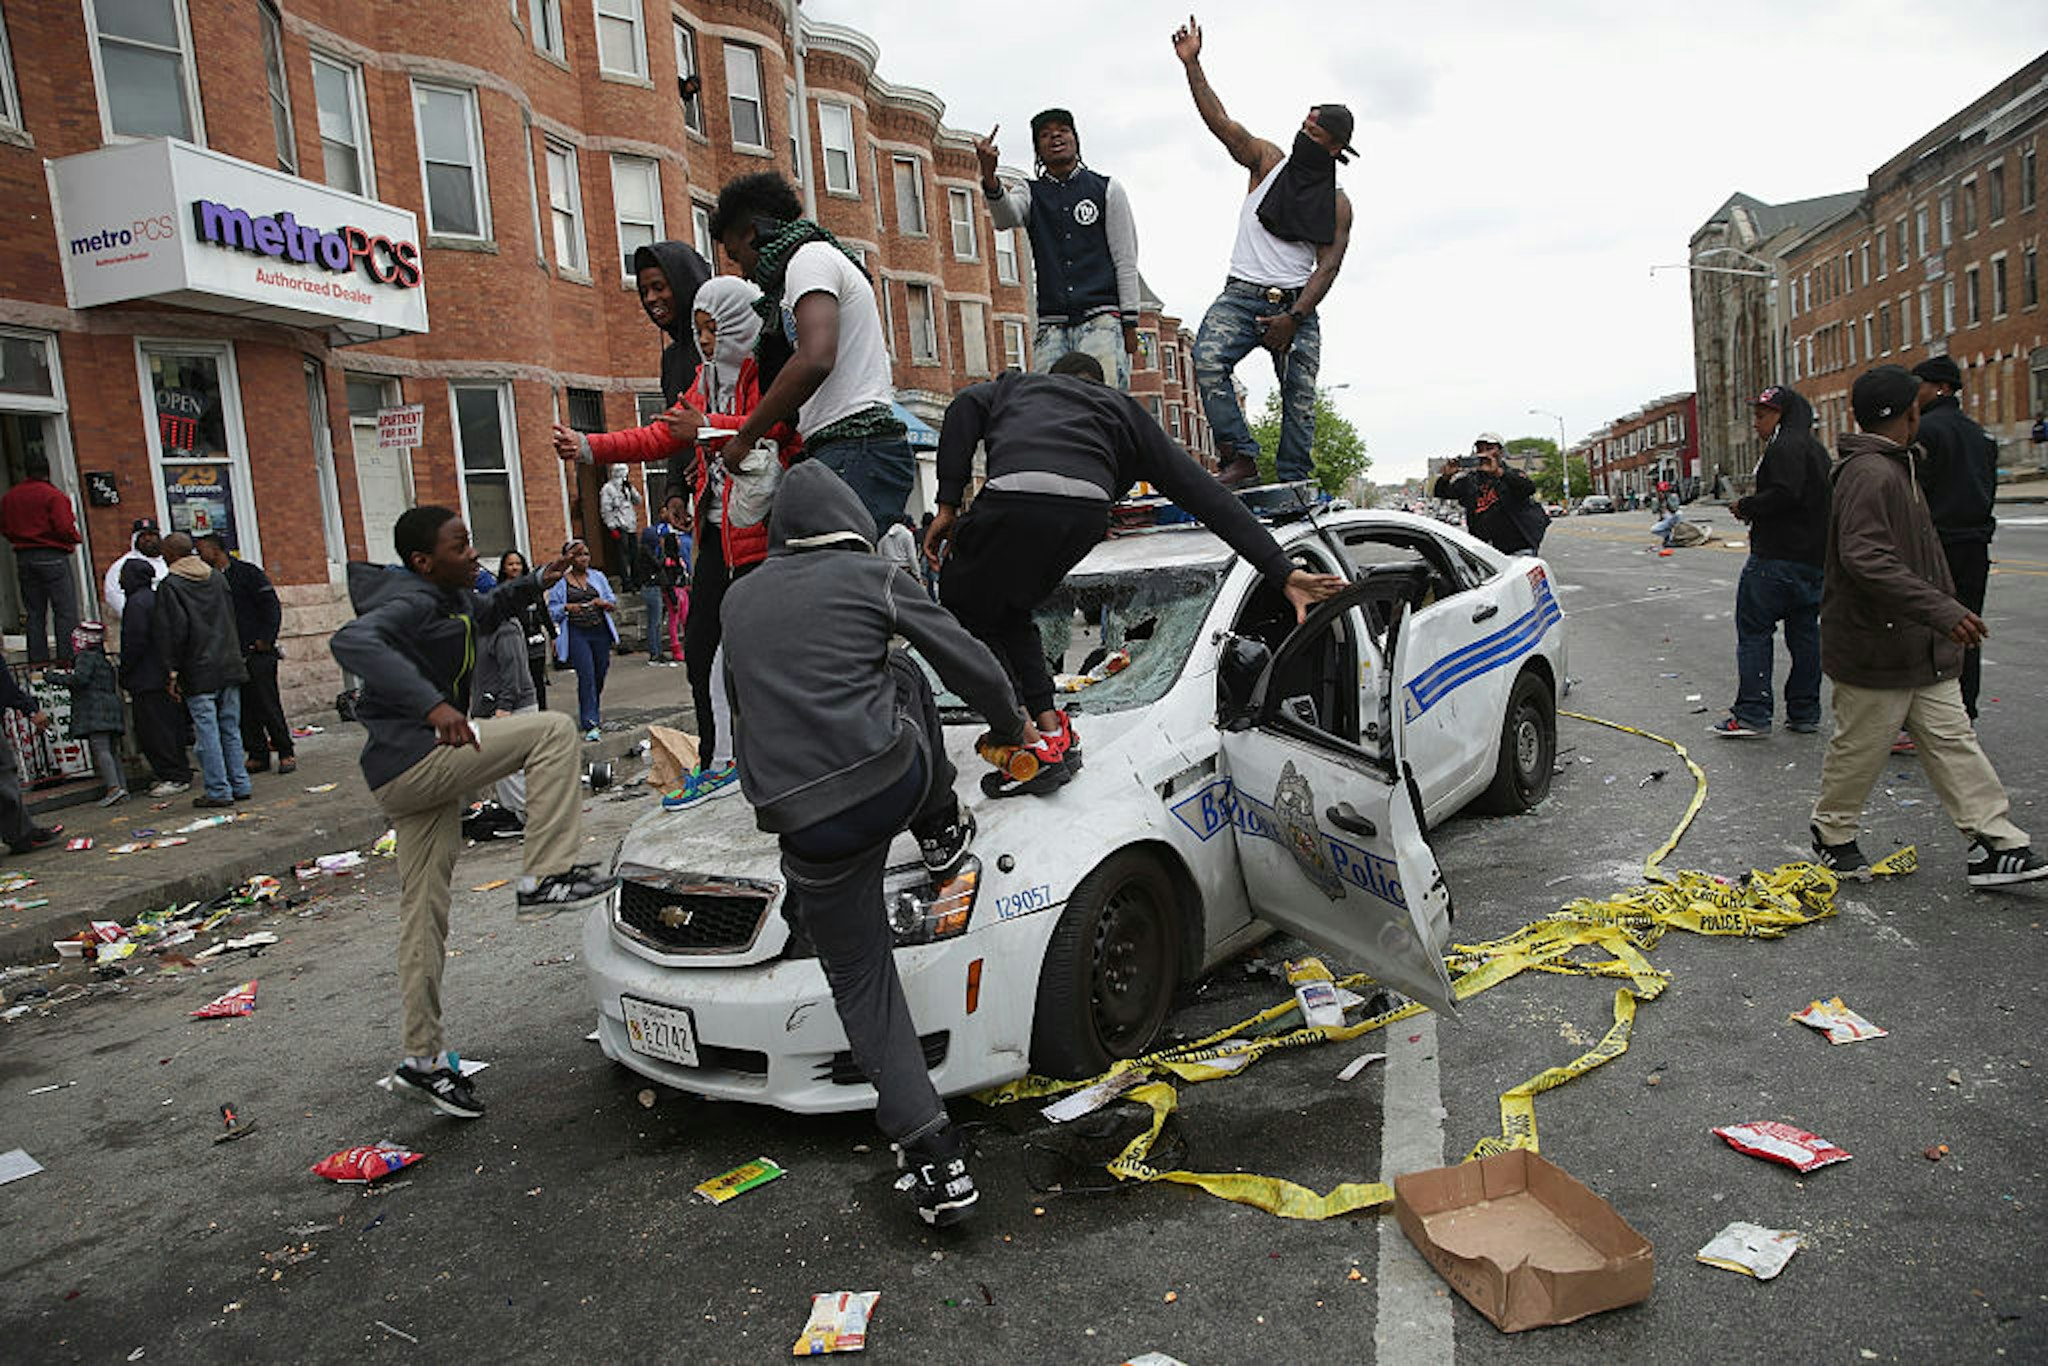 BALTIMORE, MD - APRIL 27: Demonstrators climb on a destroyed Baltimore Police car in the street near the corner of Pennsylvania and North avenues during violent protests following the funeral of Freddie Gray April 27, 2015 in Baltimore, Maryland. Gray, 25, who was arrested for possessing a switch blade knife April 12 outside the Gilmor Homes housing project on Baltimore's west side. According to his attorney, Gray died a week later in the hospital from a severe spinal cord injury he received while in police custody. (Photo by Chip Somodevilla/Getty Images)